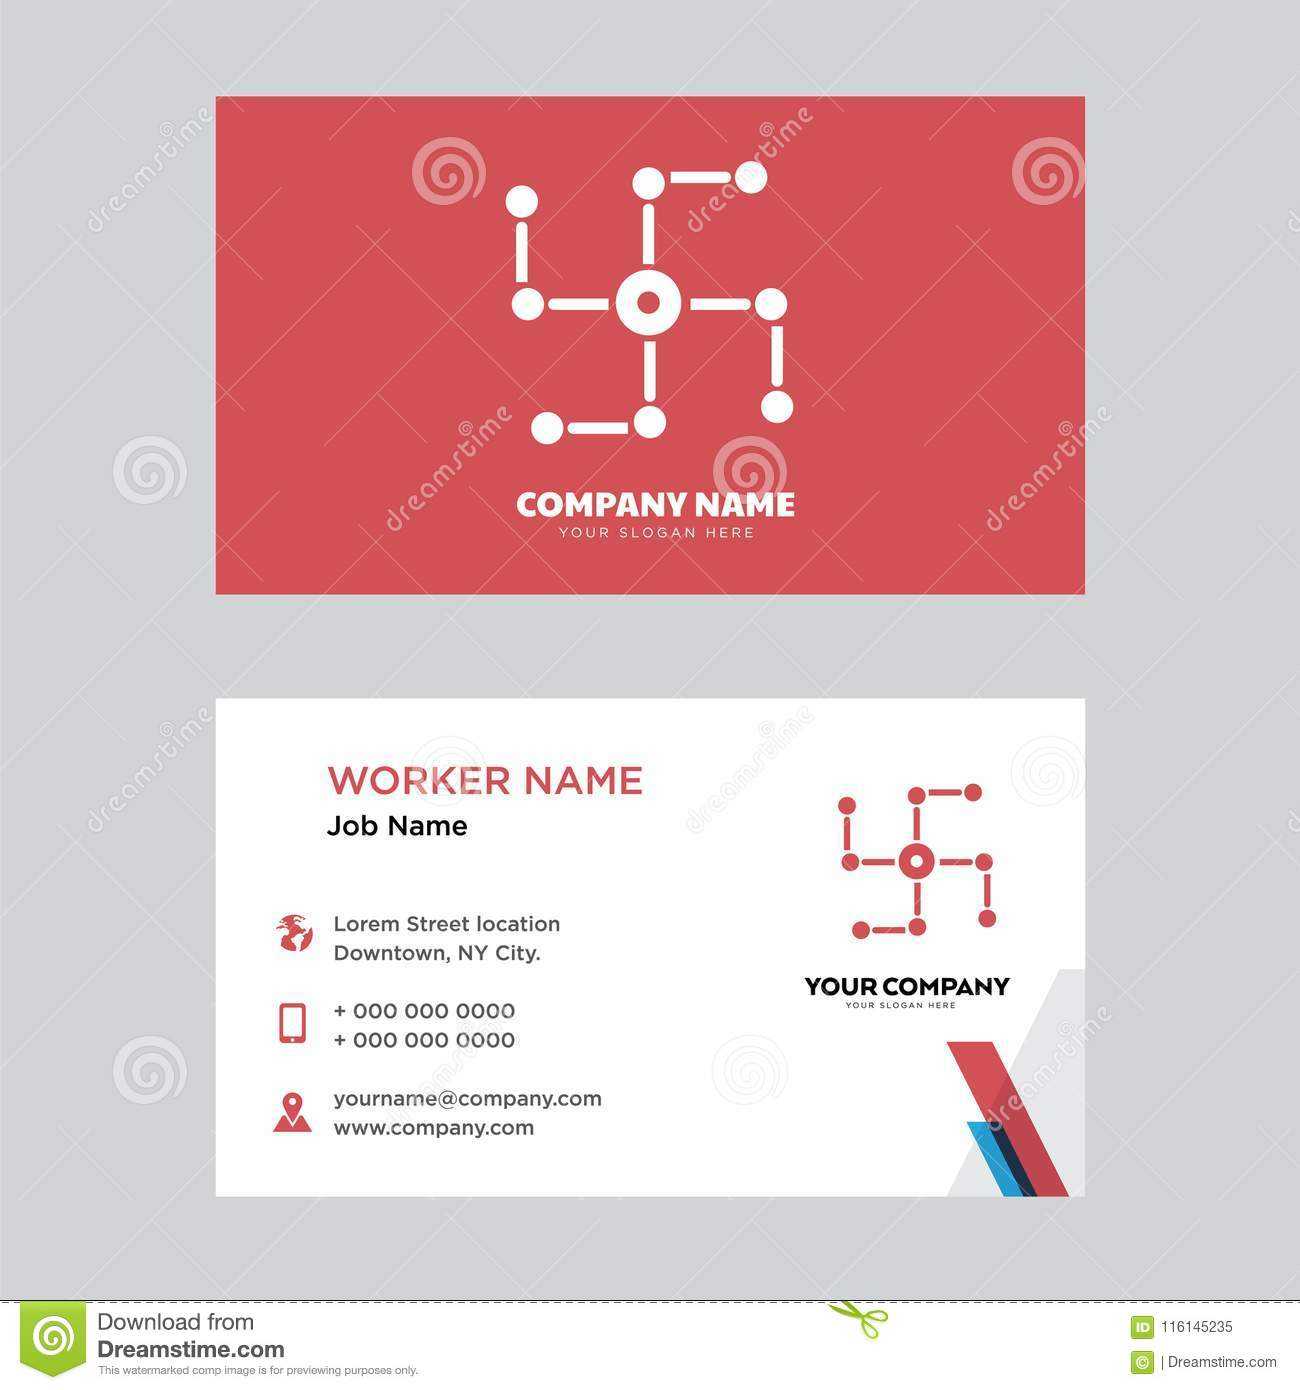 Networking Business Card Design Editorial Image Intended For Networking Card Template